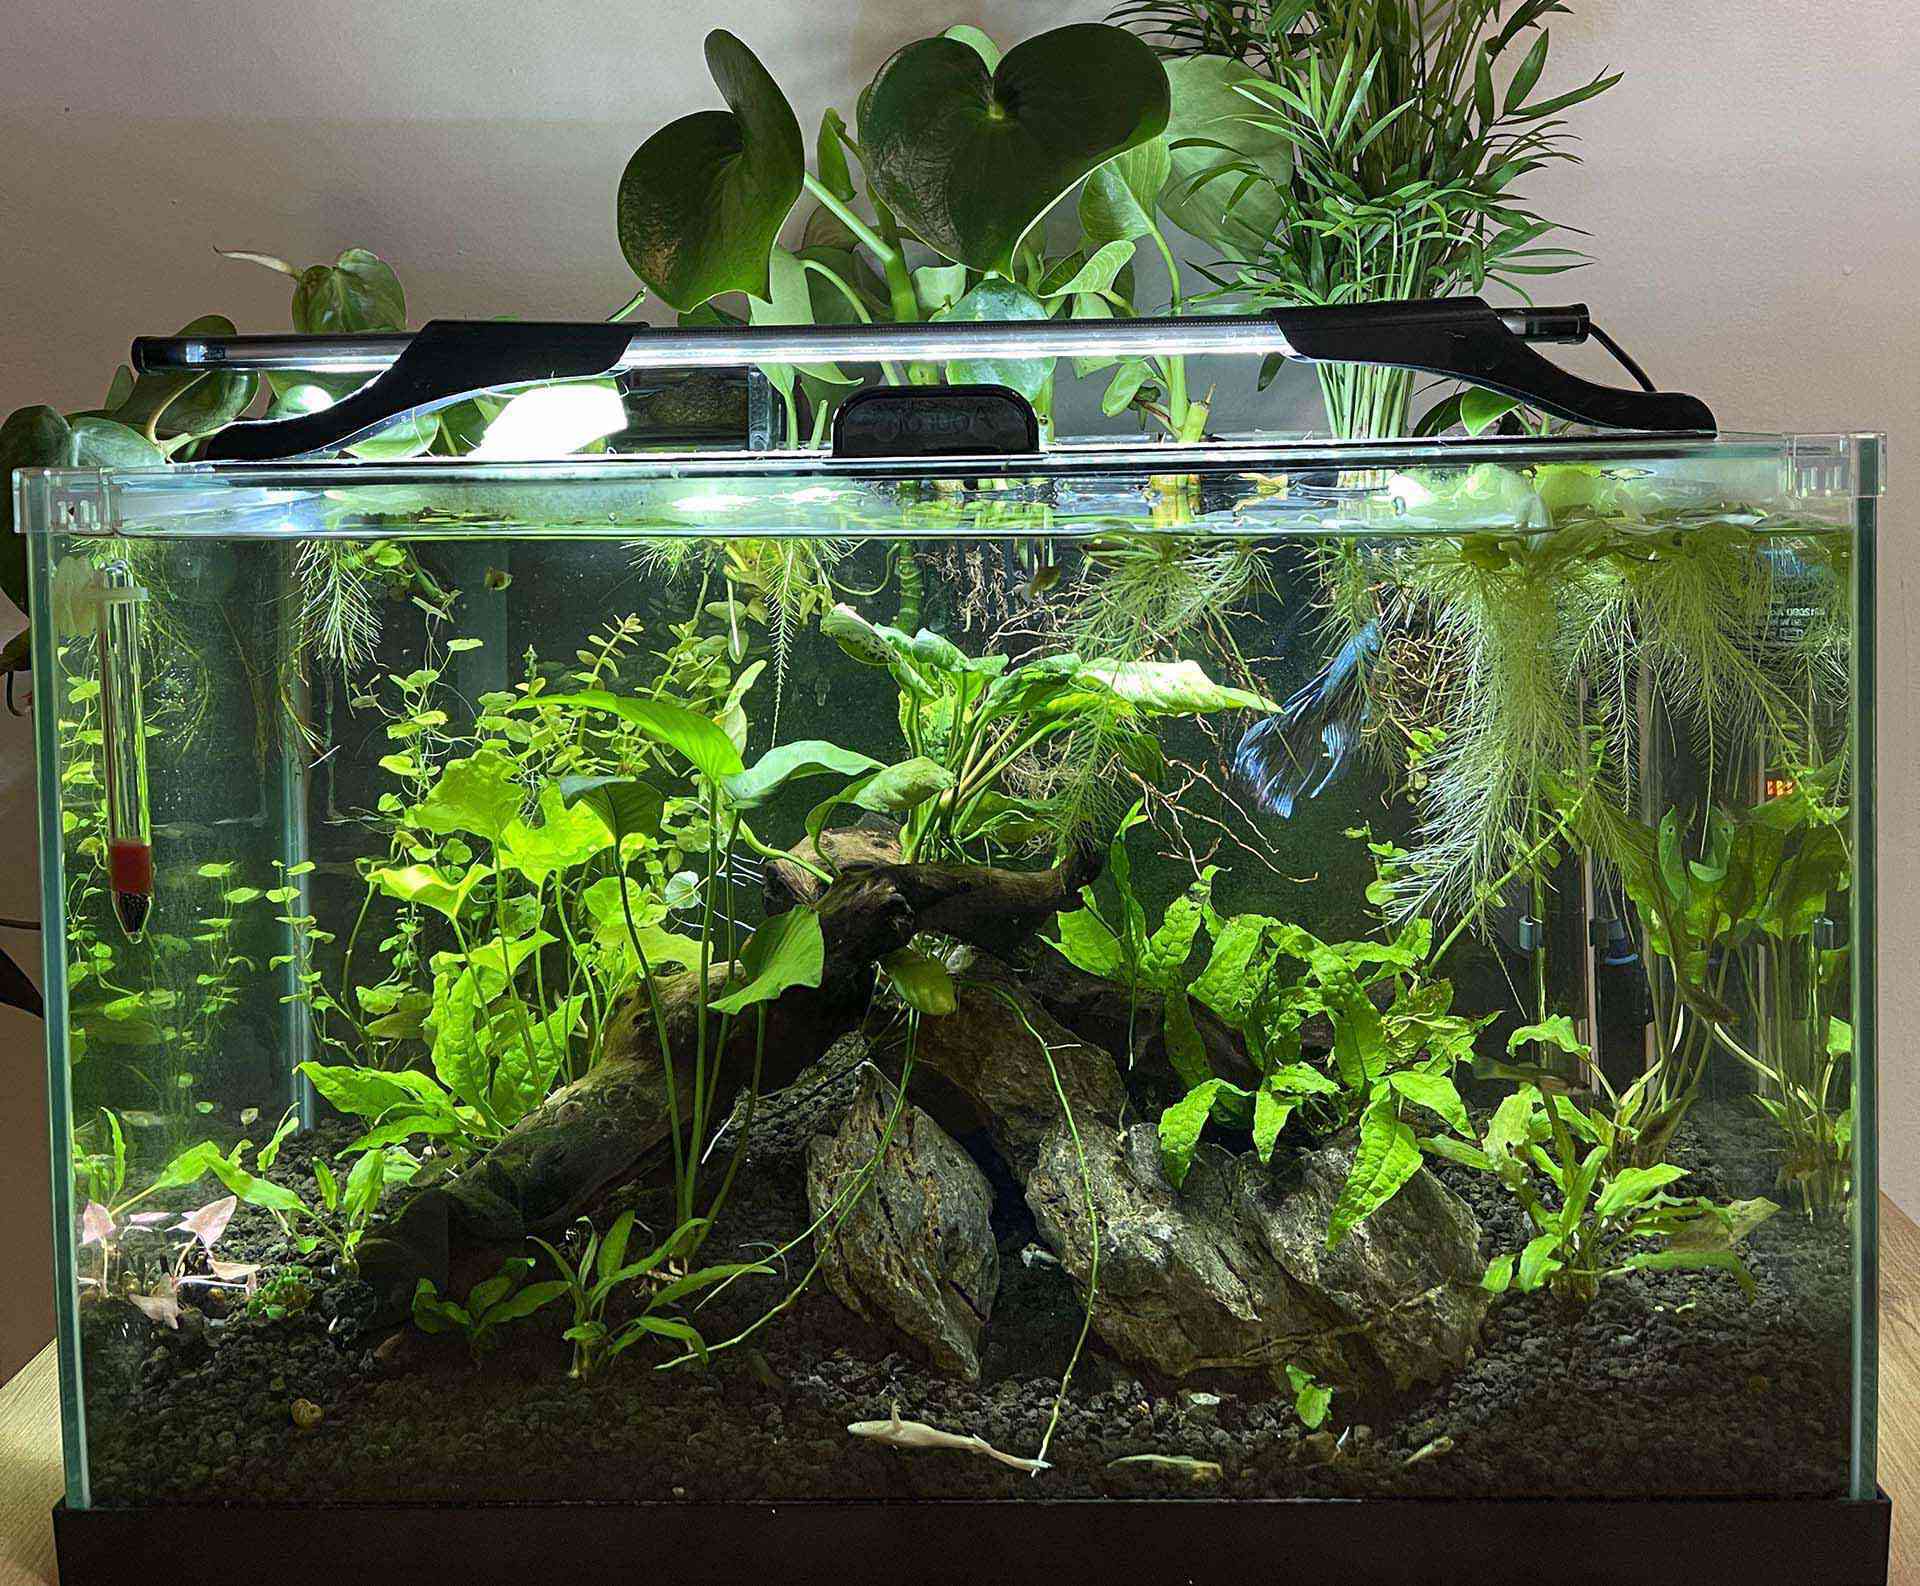 how to build an aquaponics system